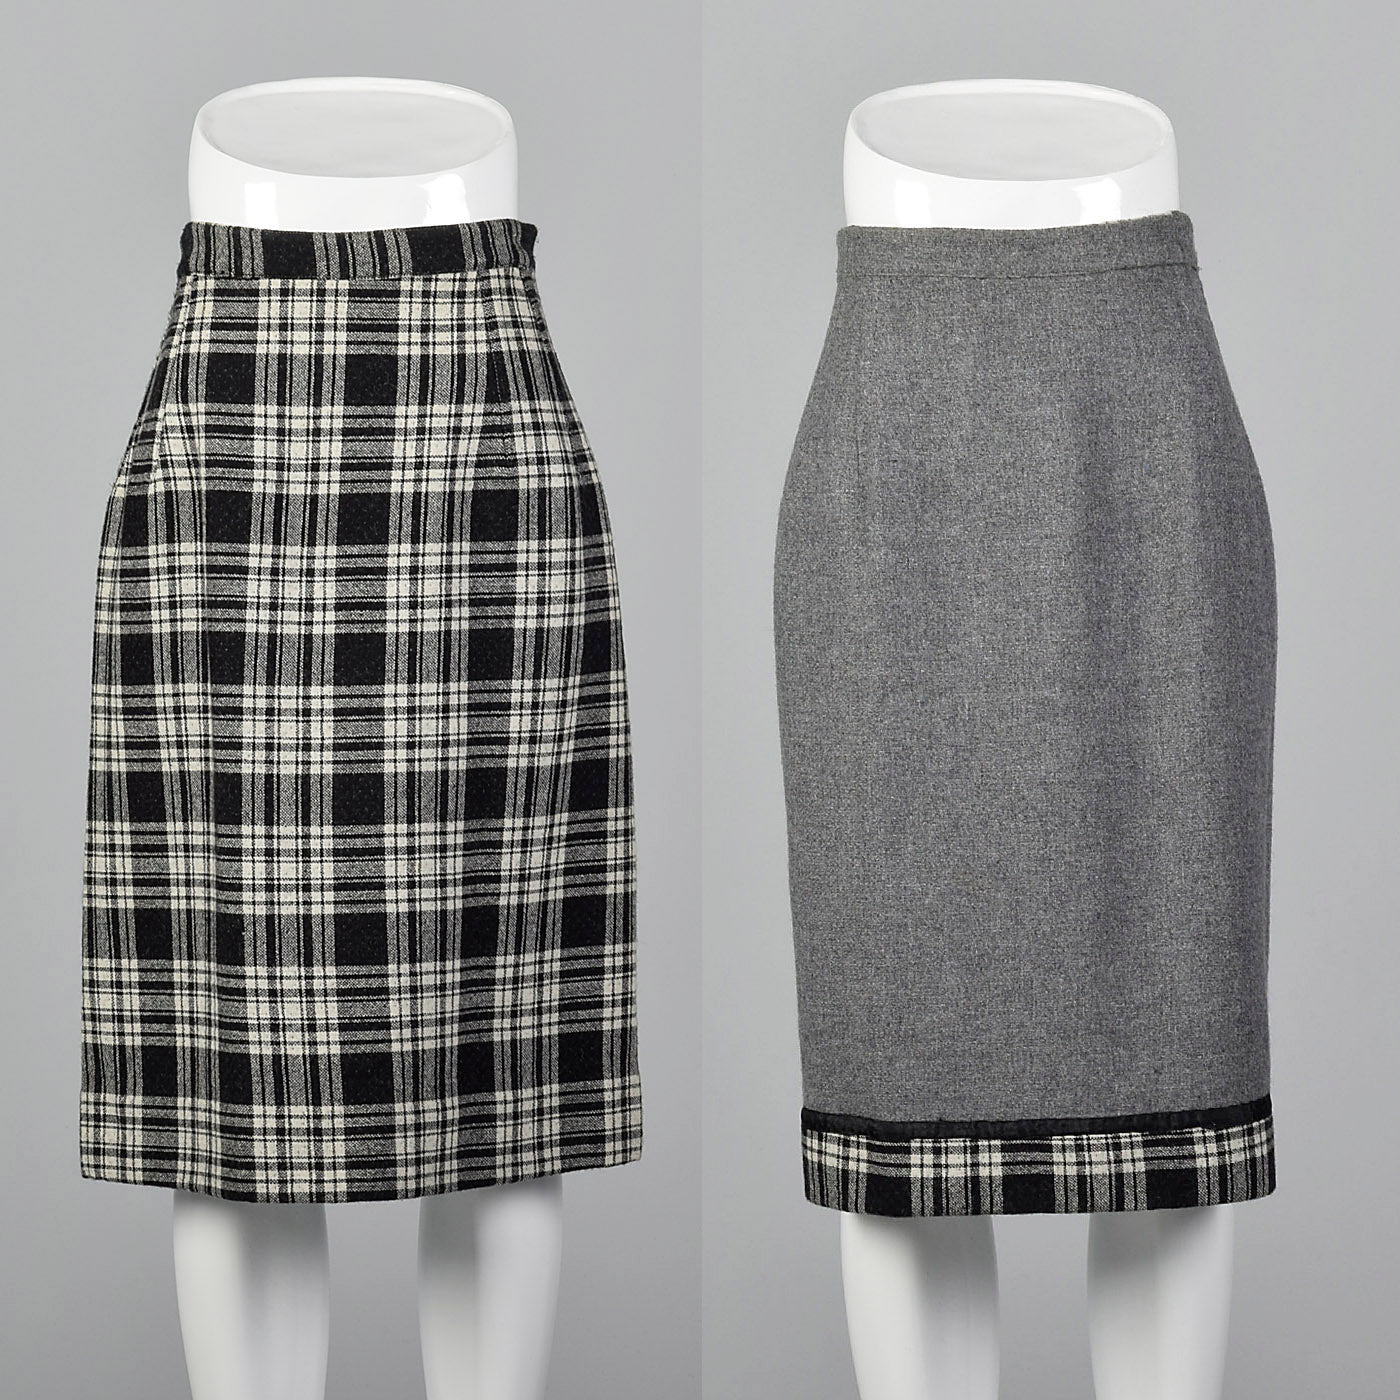 1950s Reversible Pencil Skirt in Gray and Black Plaid